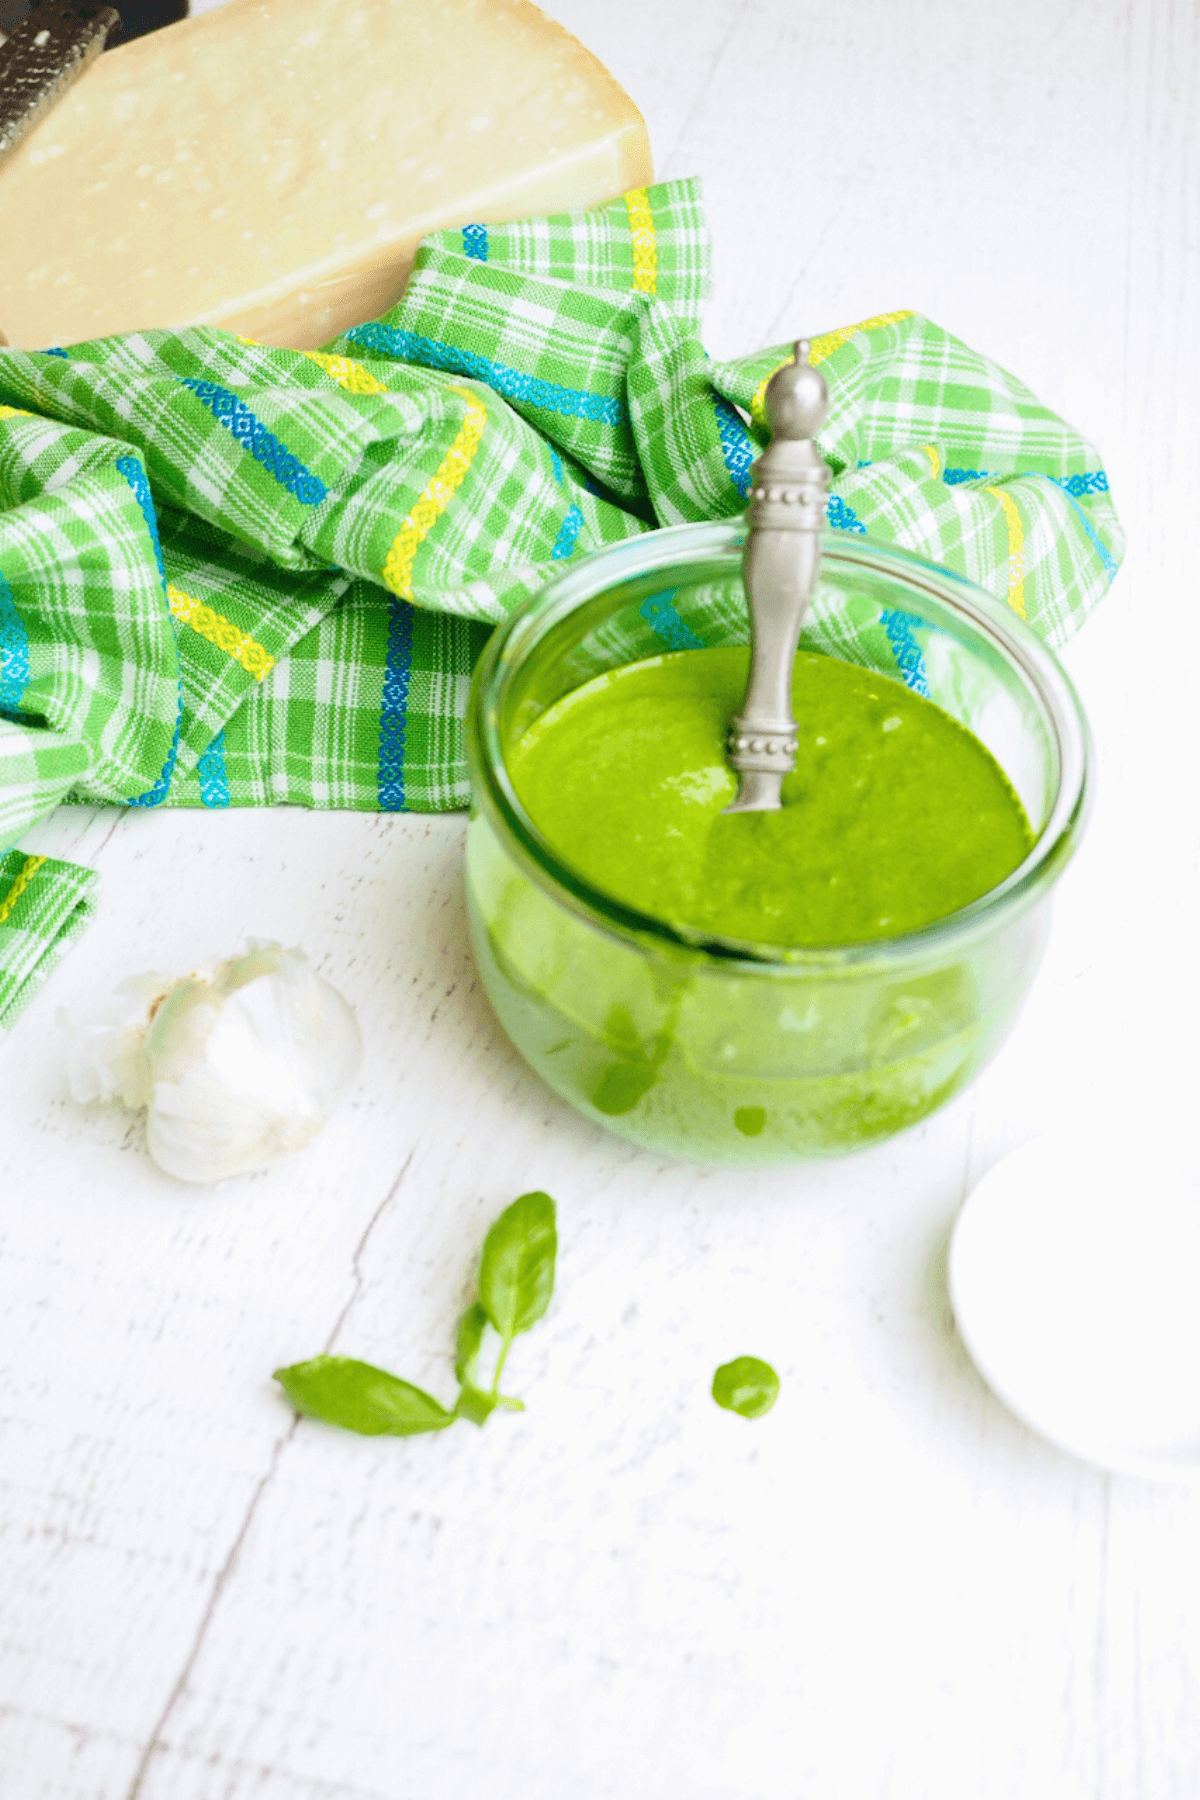 How to make pesto without nuts with jar of pesto sauce filled with scoop inside, some garlic and fresh basil nearby.